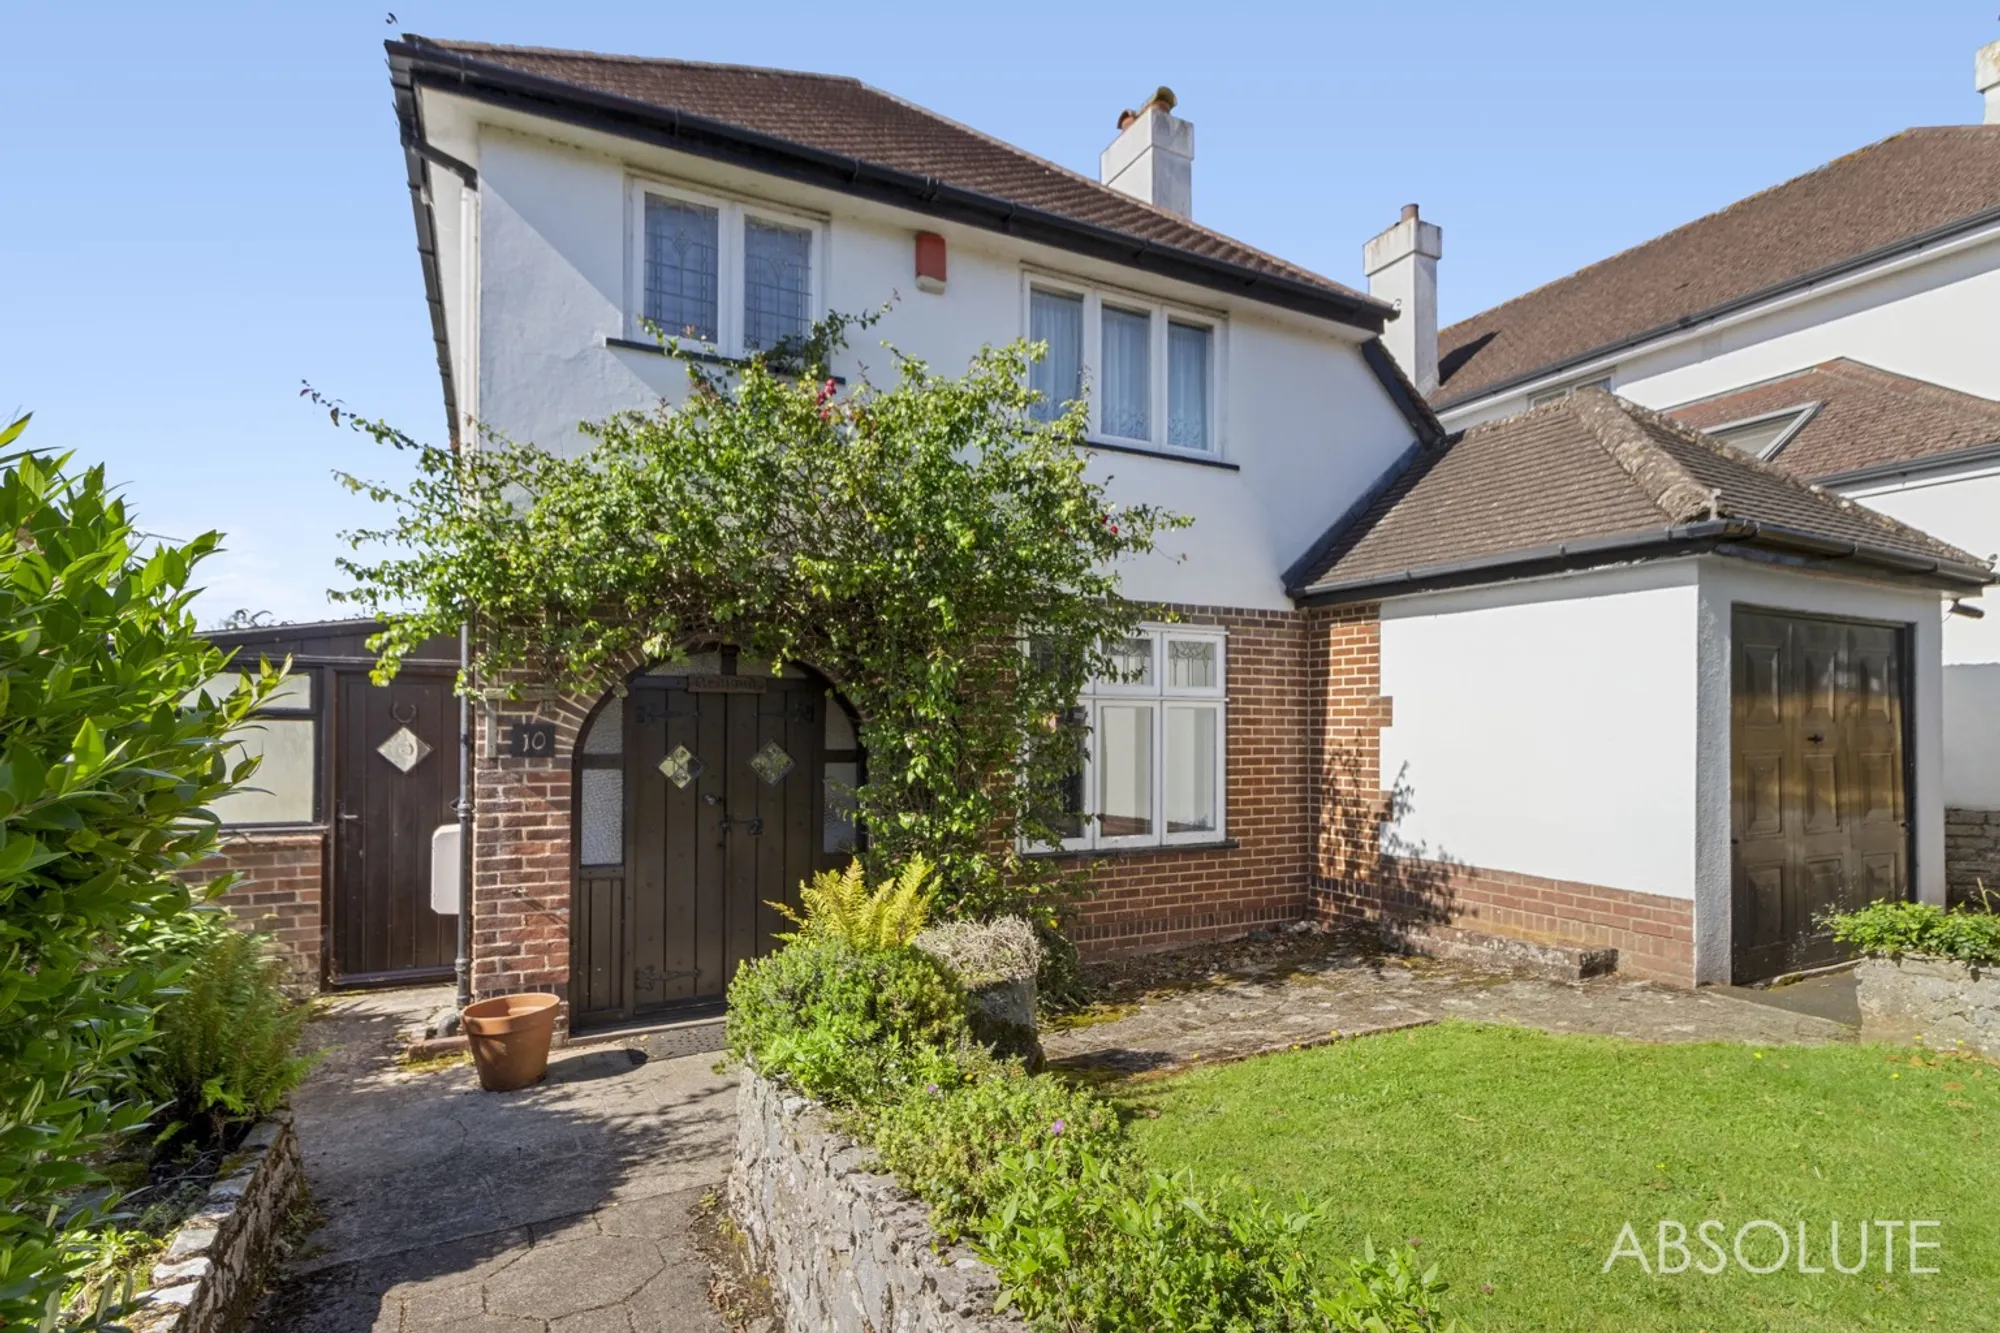 3 bed detached house for sale 0